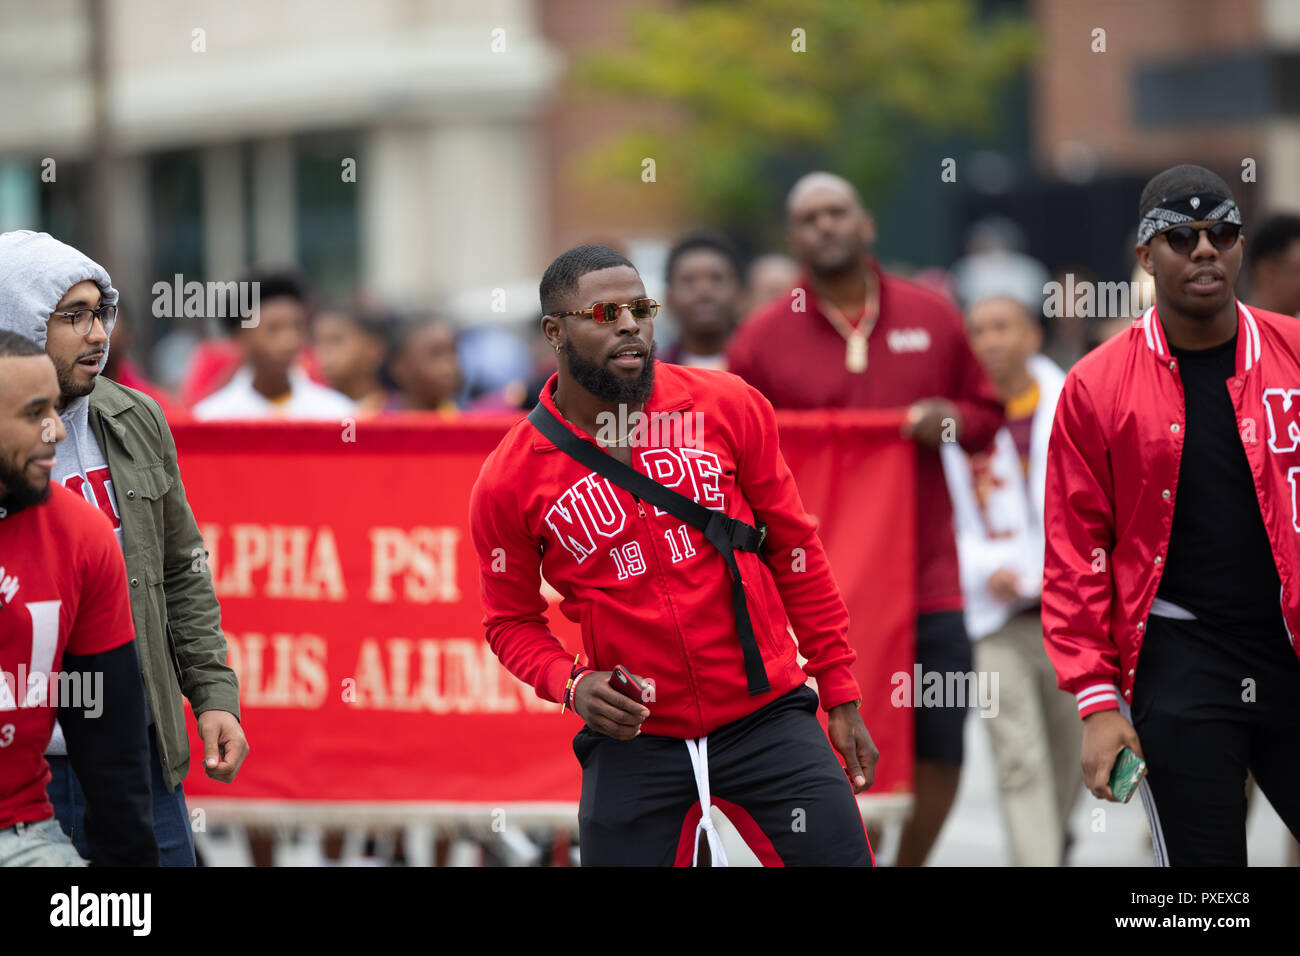 Indianapolis, Indiana, USA - September 22, 2018: The Circle City Classic  Parade, Members of the Kappa Alpha Psi Fraternity dancing during the parade  Stock Photo - Alamy